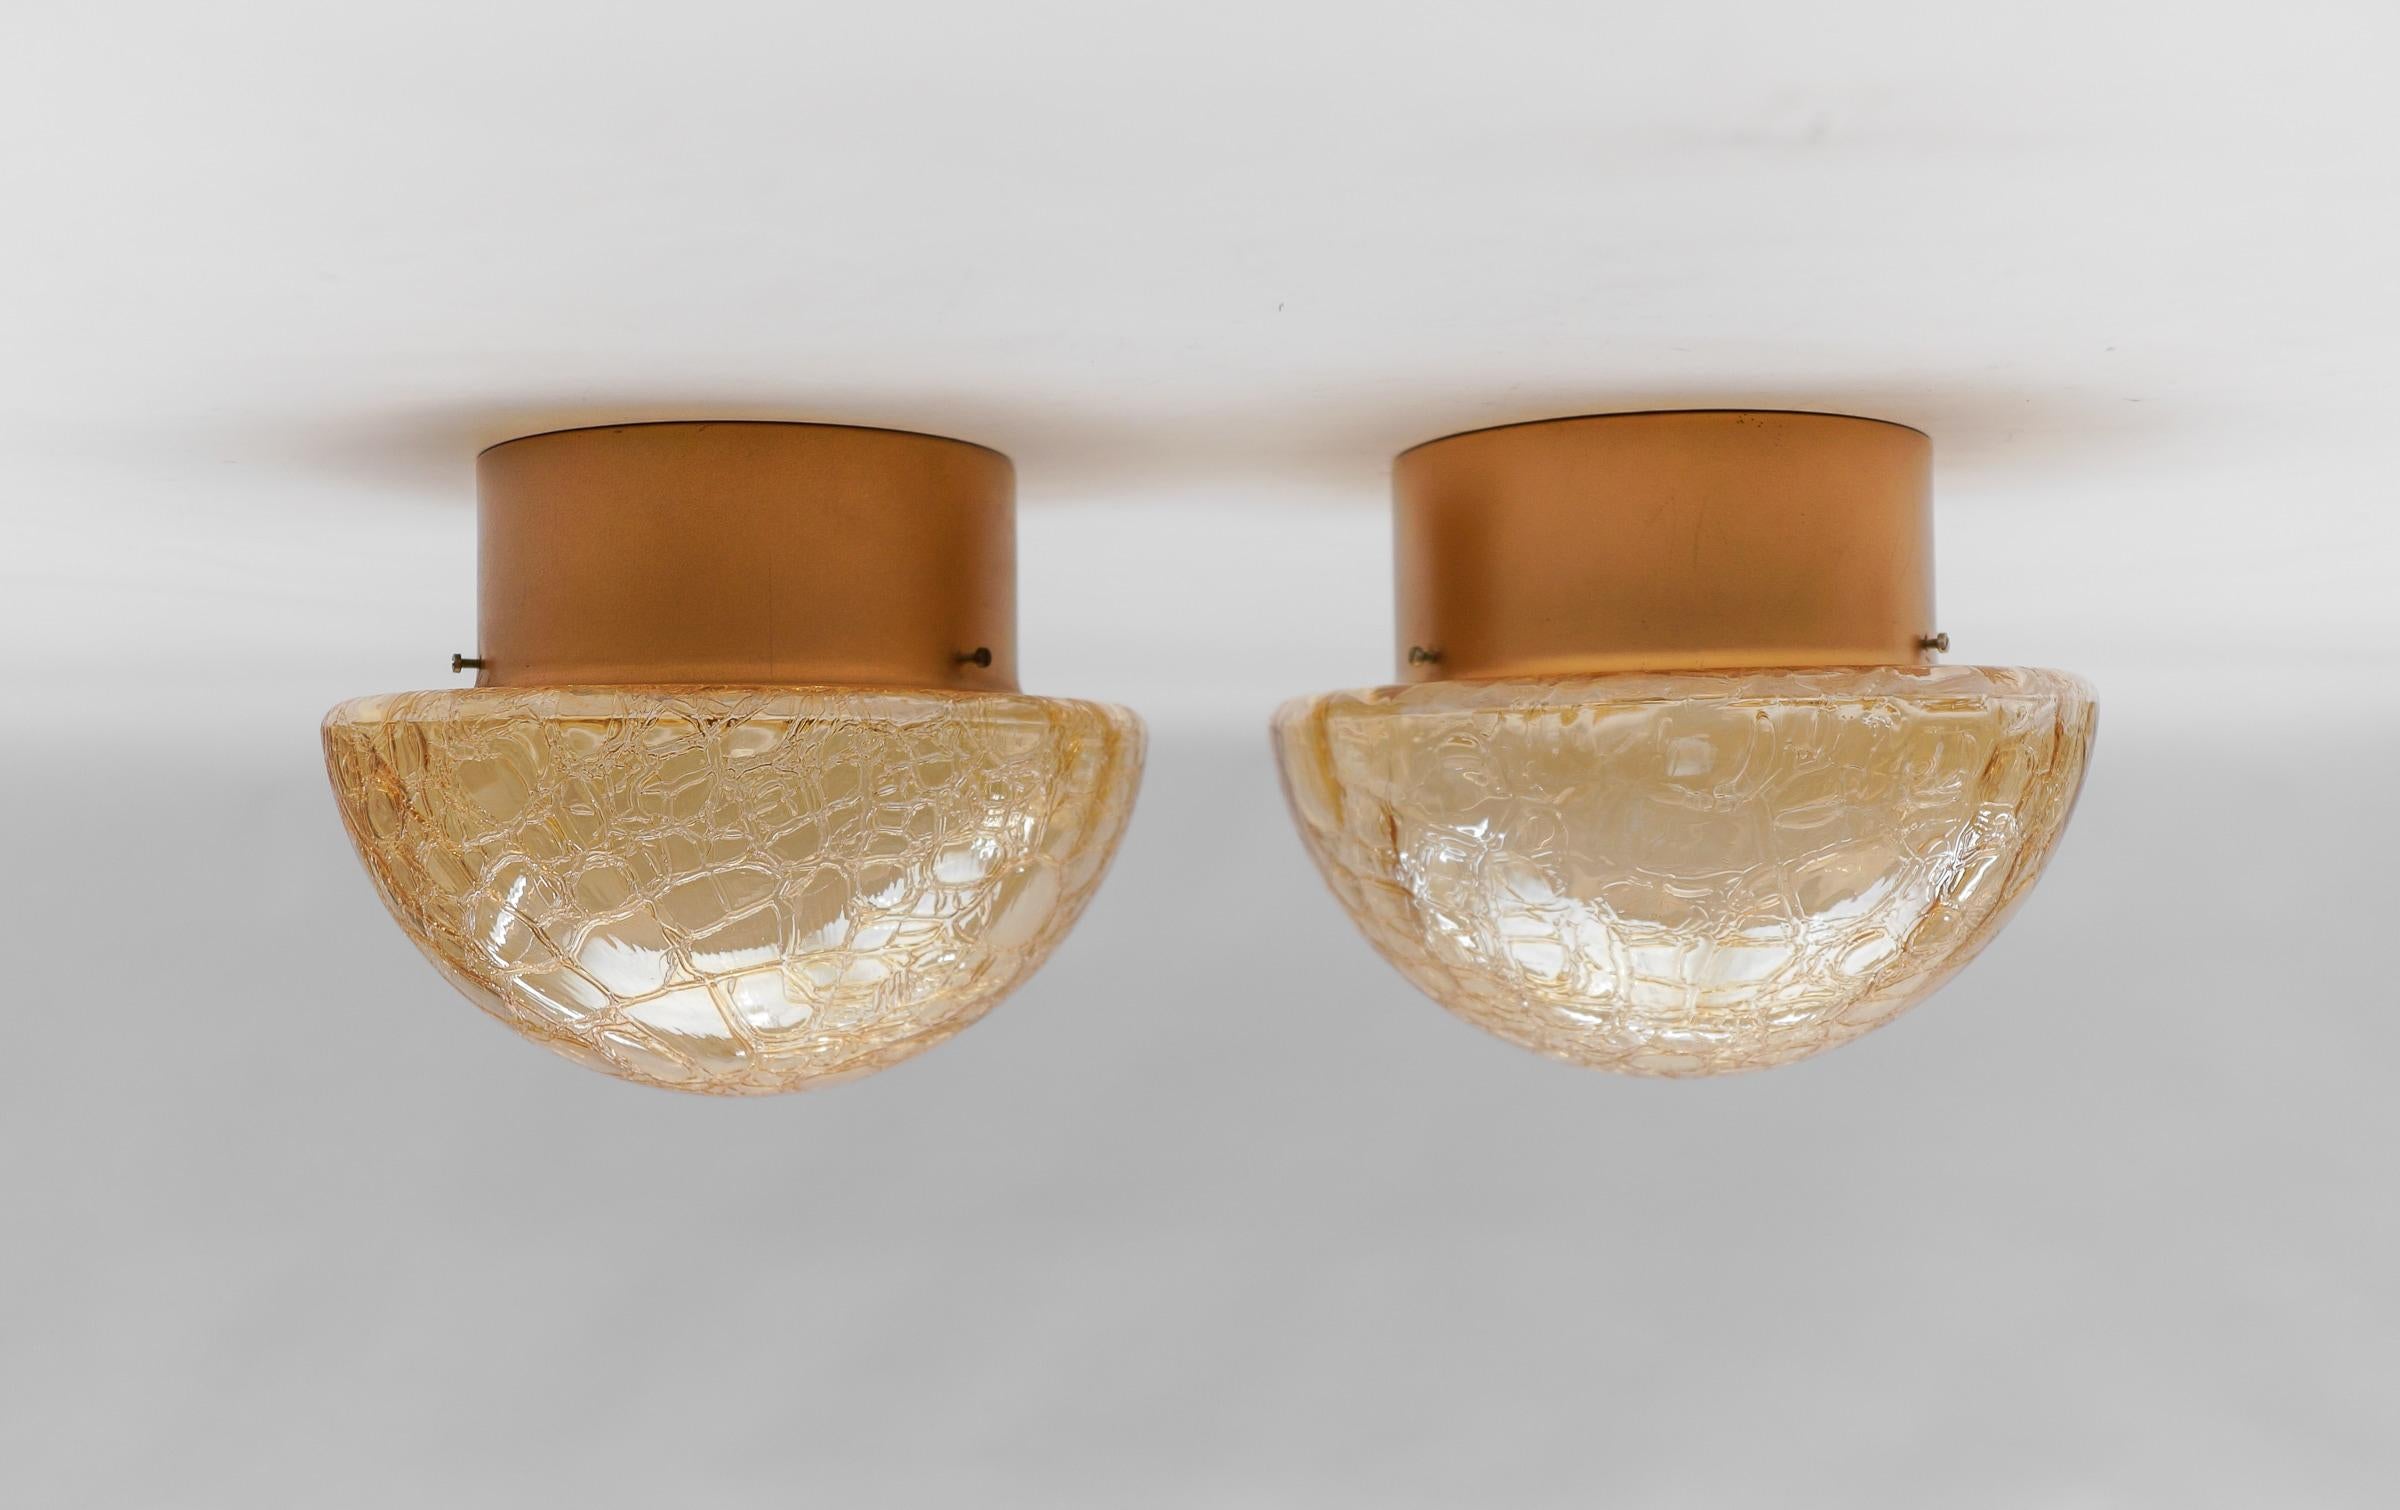 Pair of Amber Gold Mushroom Shaped Wall Lamps / Flush Mount Lights, 1960s For Sale 8